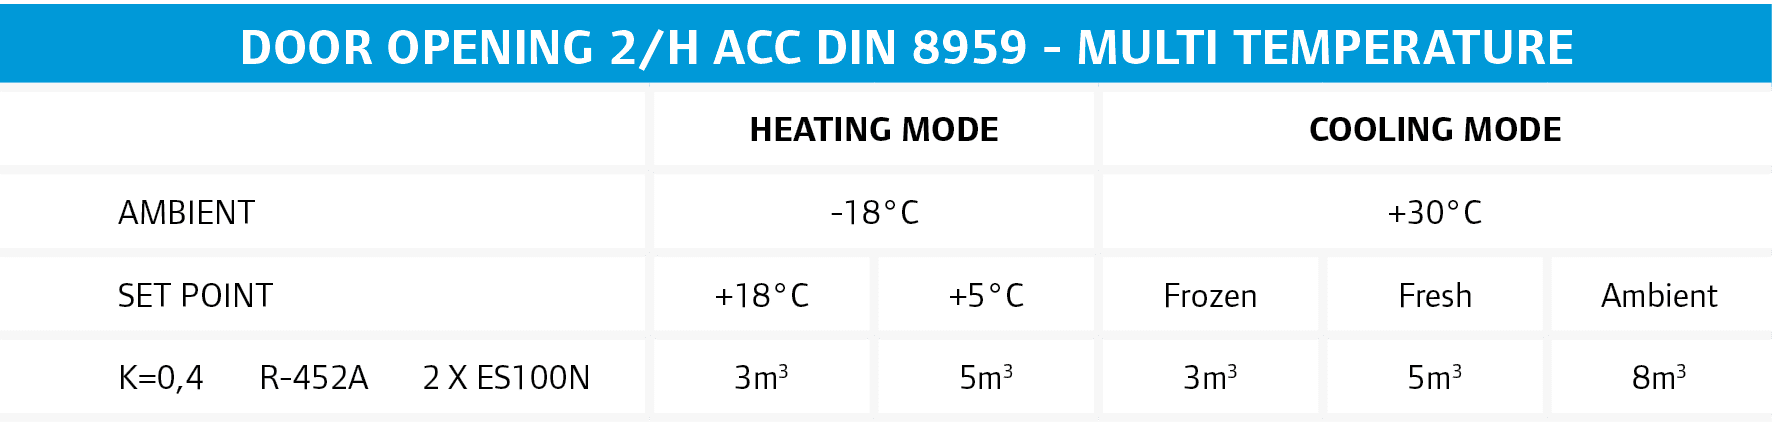 Door opening 2/h acc DIN 8959 - multi Temperature,,HEATING MODE,COOLING MODE,ambient ,-18°C,+30°C,set point,+18°C,+5°...